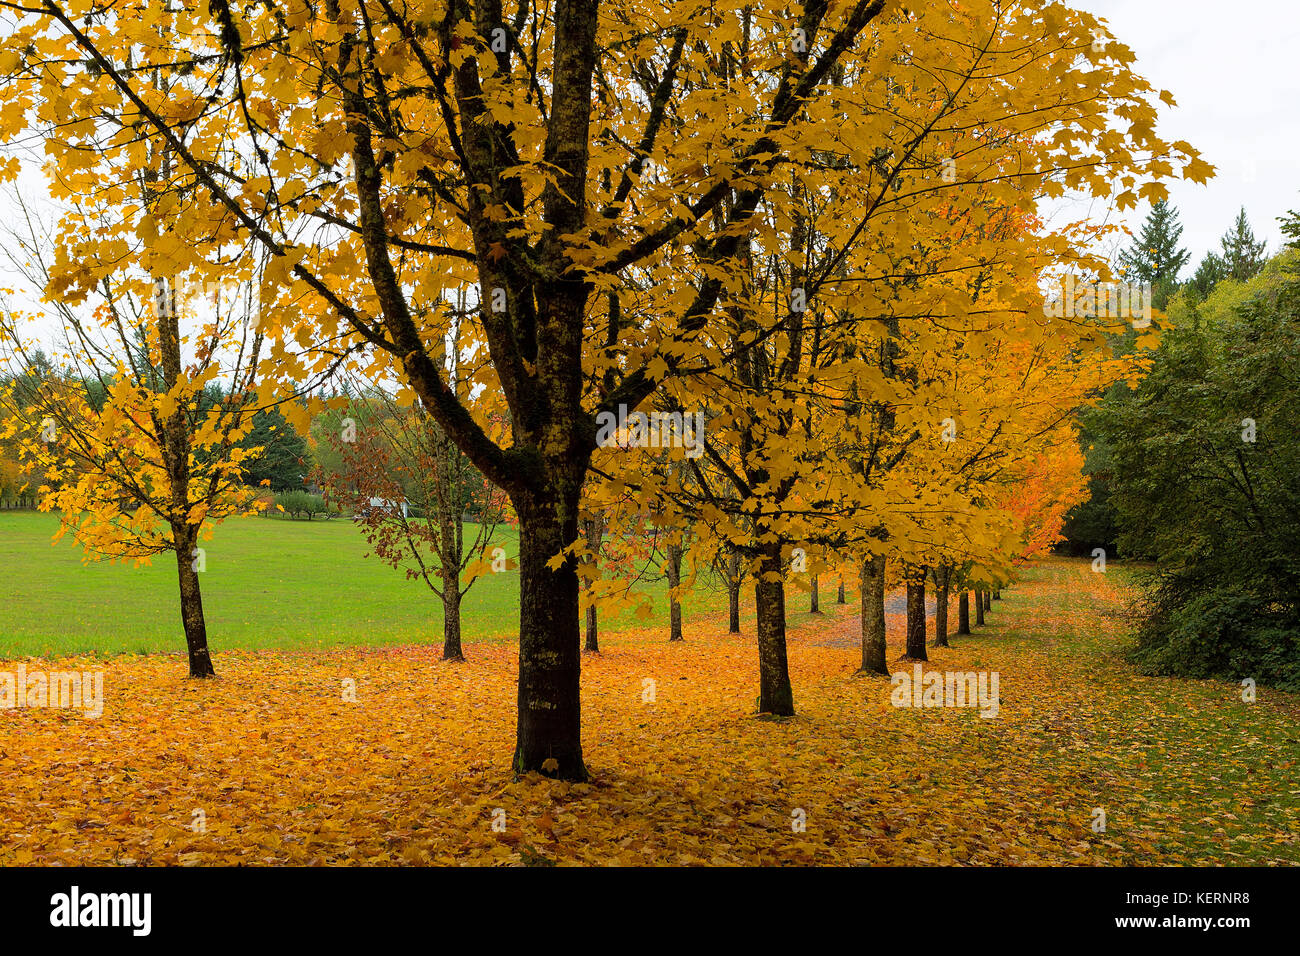 Maple trees in peak golden fall colors on tree lined waling path in the park Stock Photo